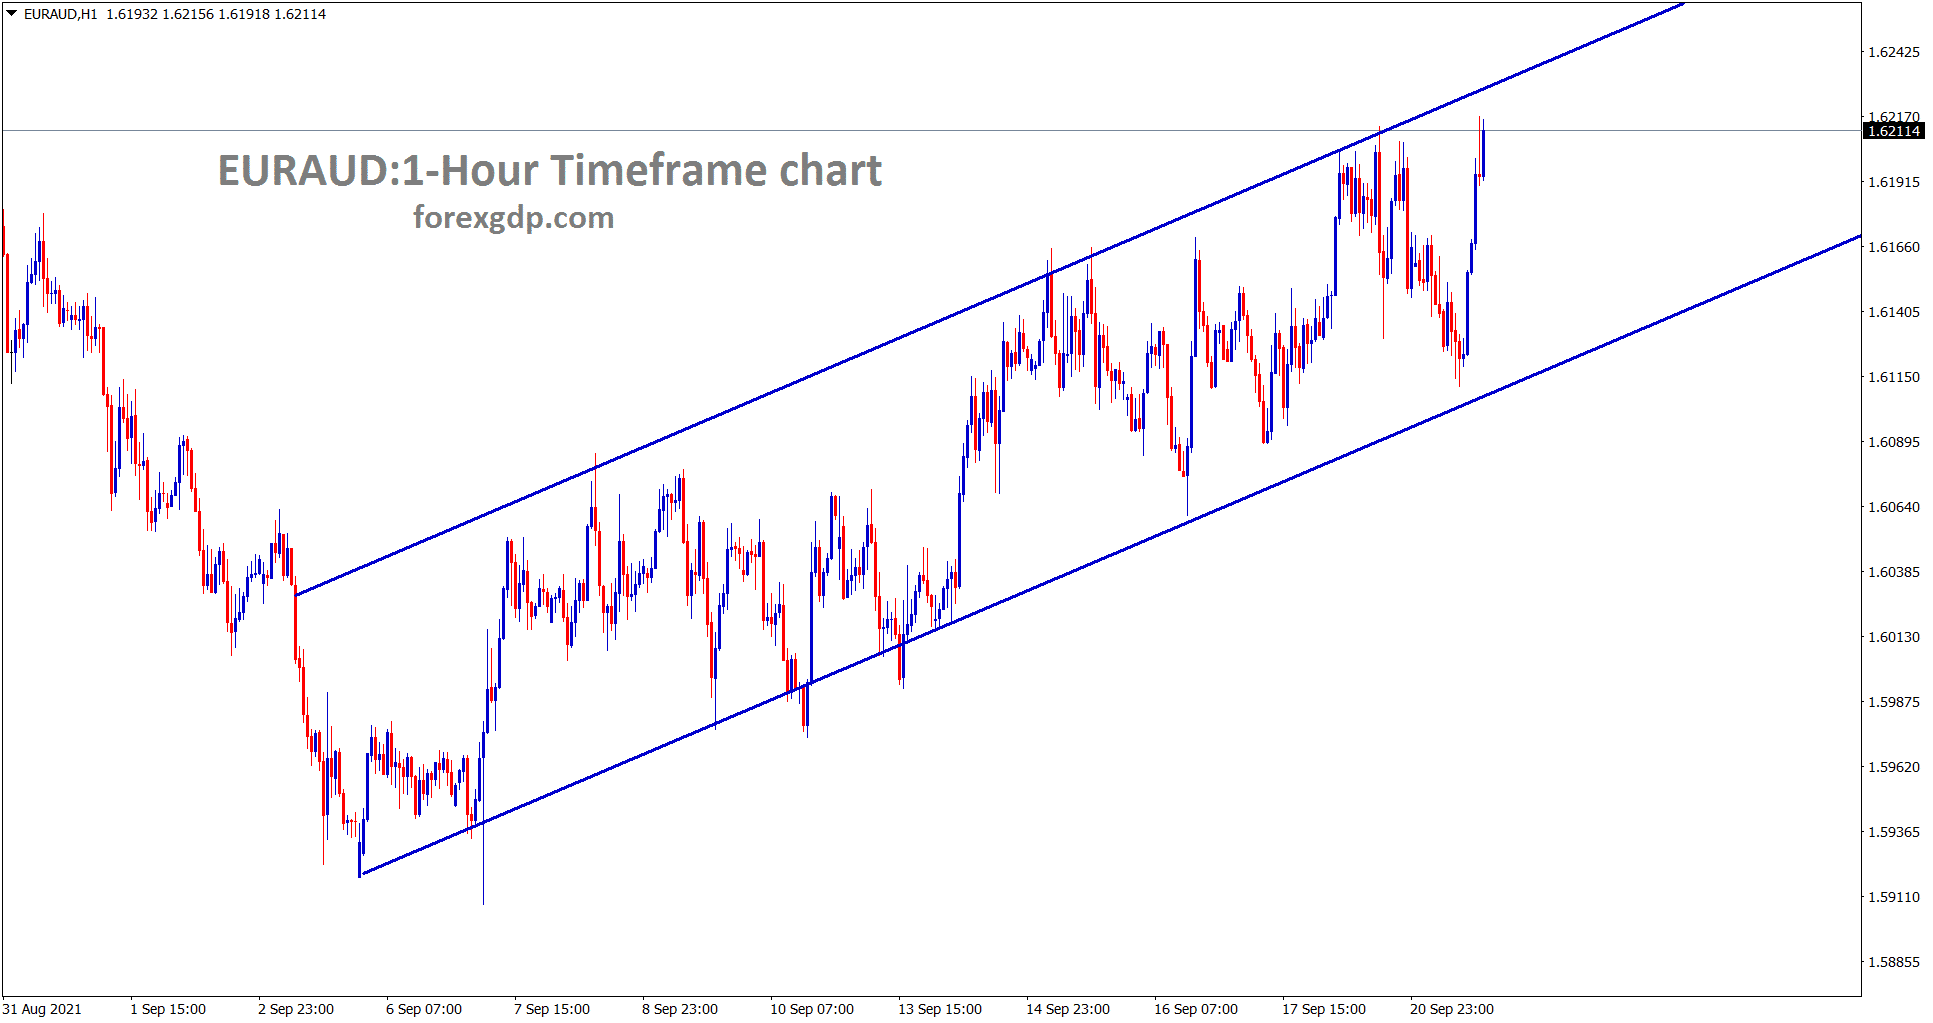 EURAUD is moving in an Ascending channel for a long time